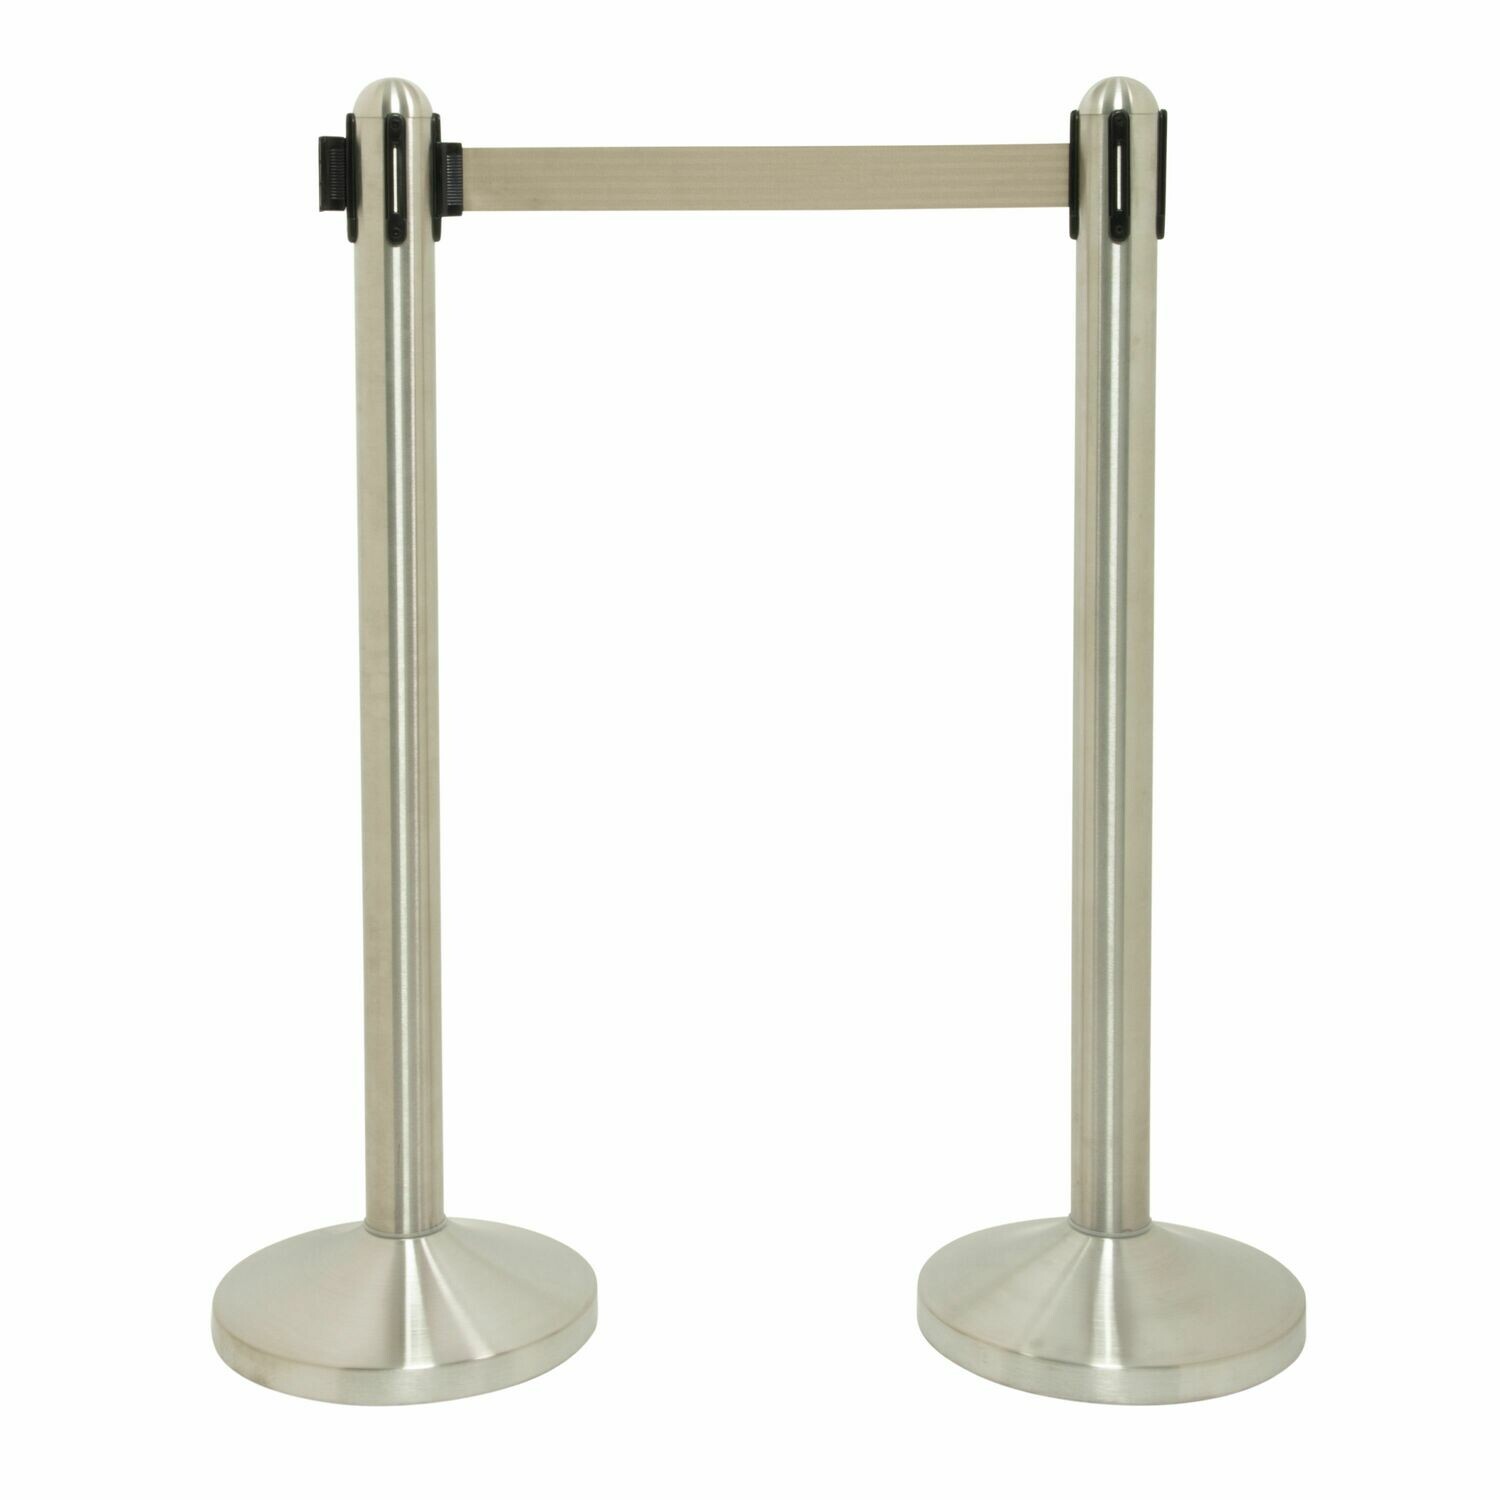 Retractable Barrier Post with Grey Belt - Brushed Steel